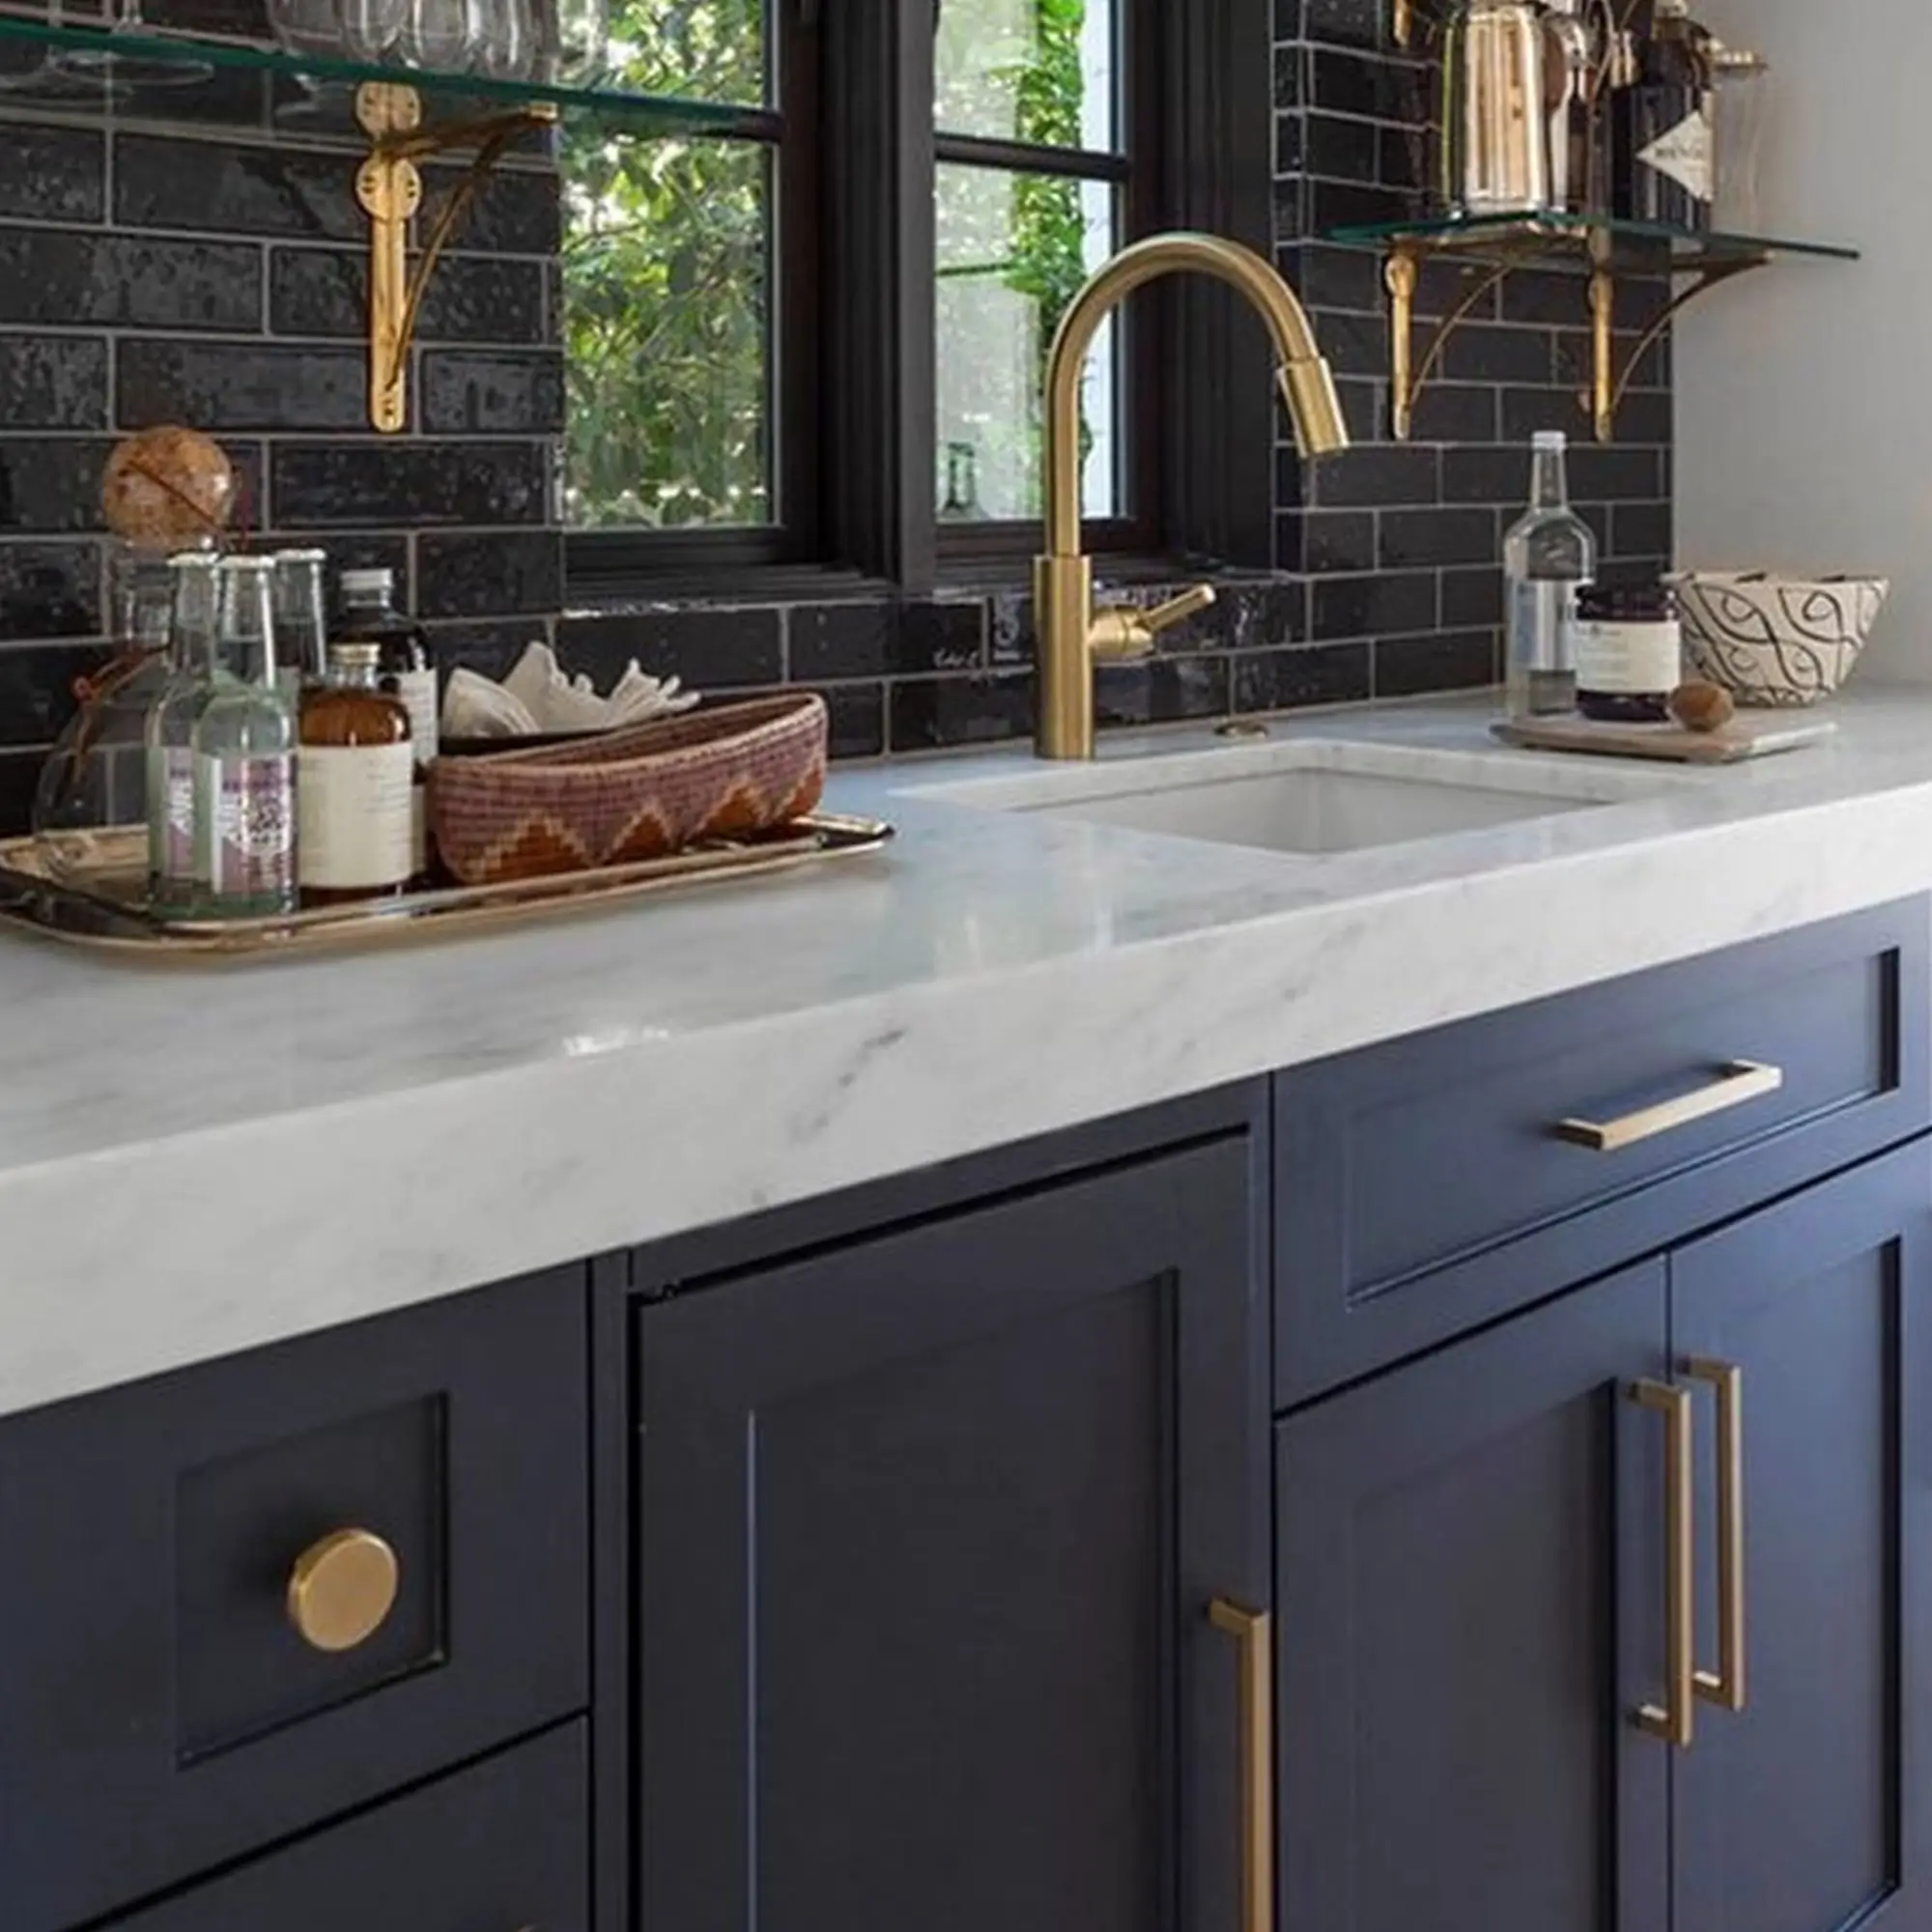 French country kitchen with navy blue color for apartment home interior design cabinetry